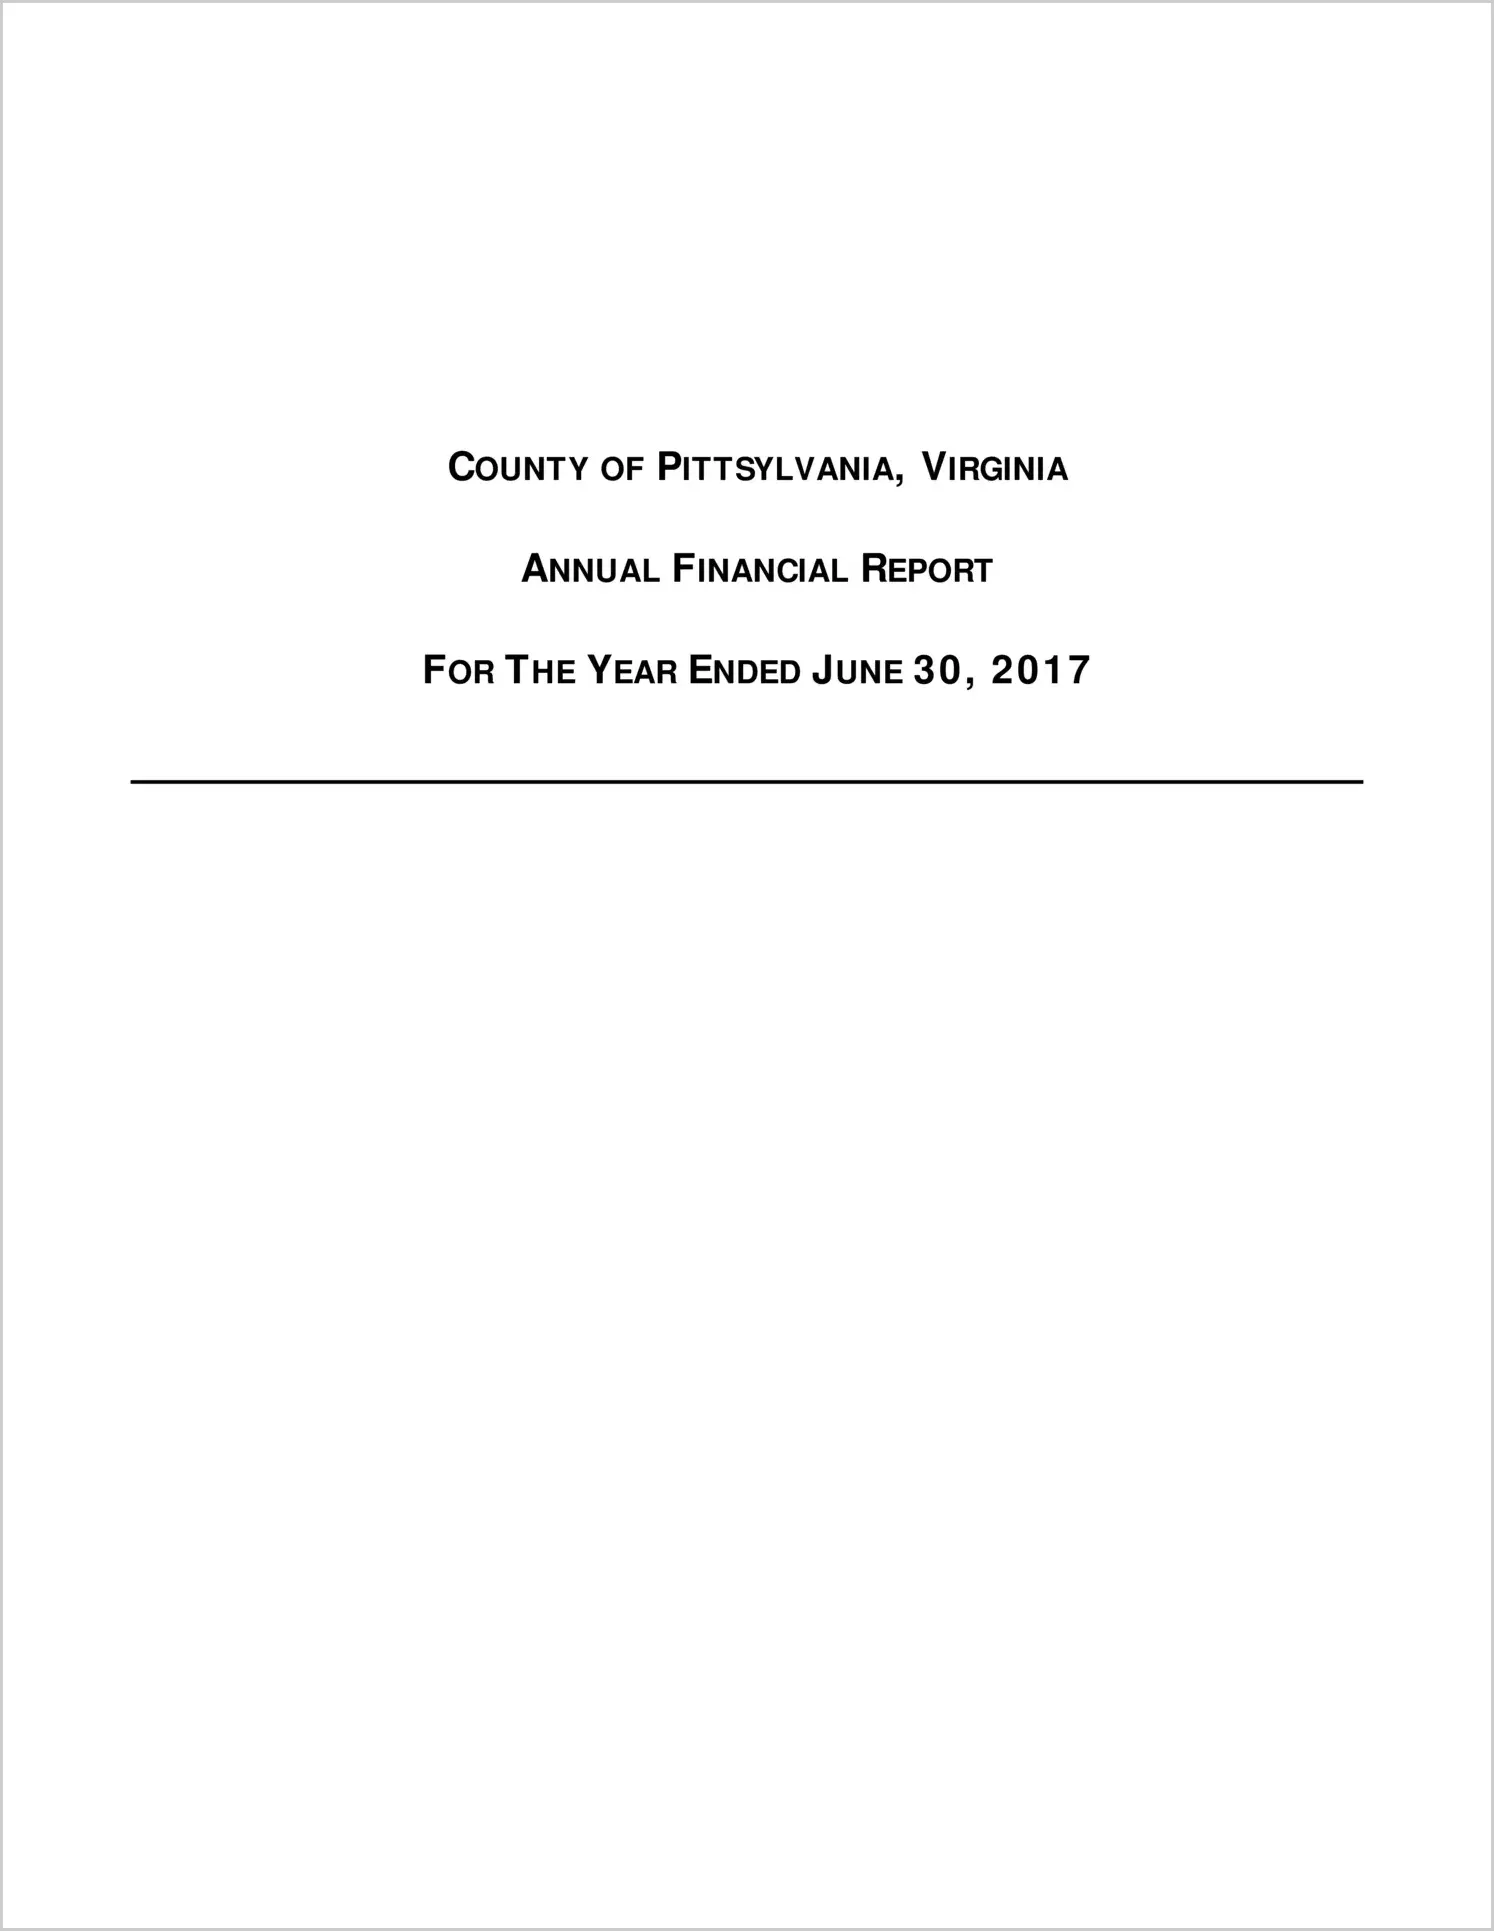 2017 Annual Financial Report for County of Pittsylvania